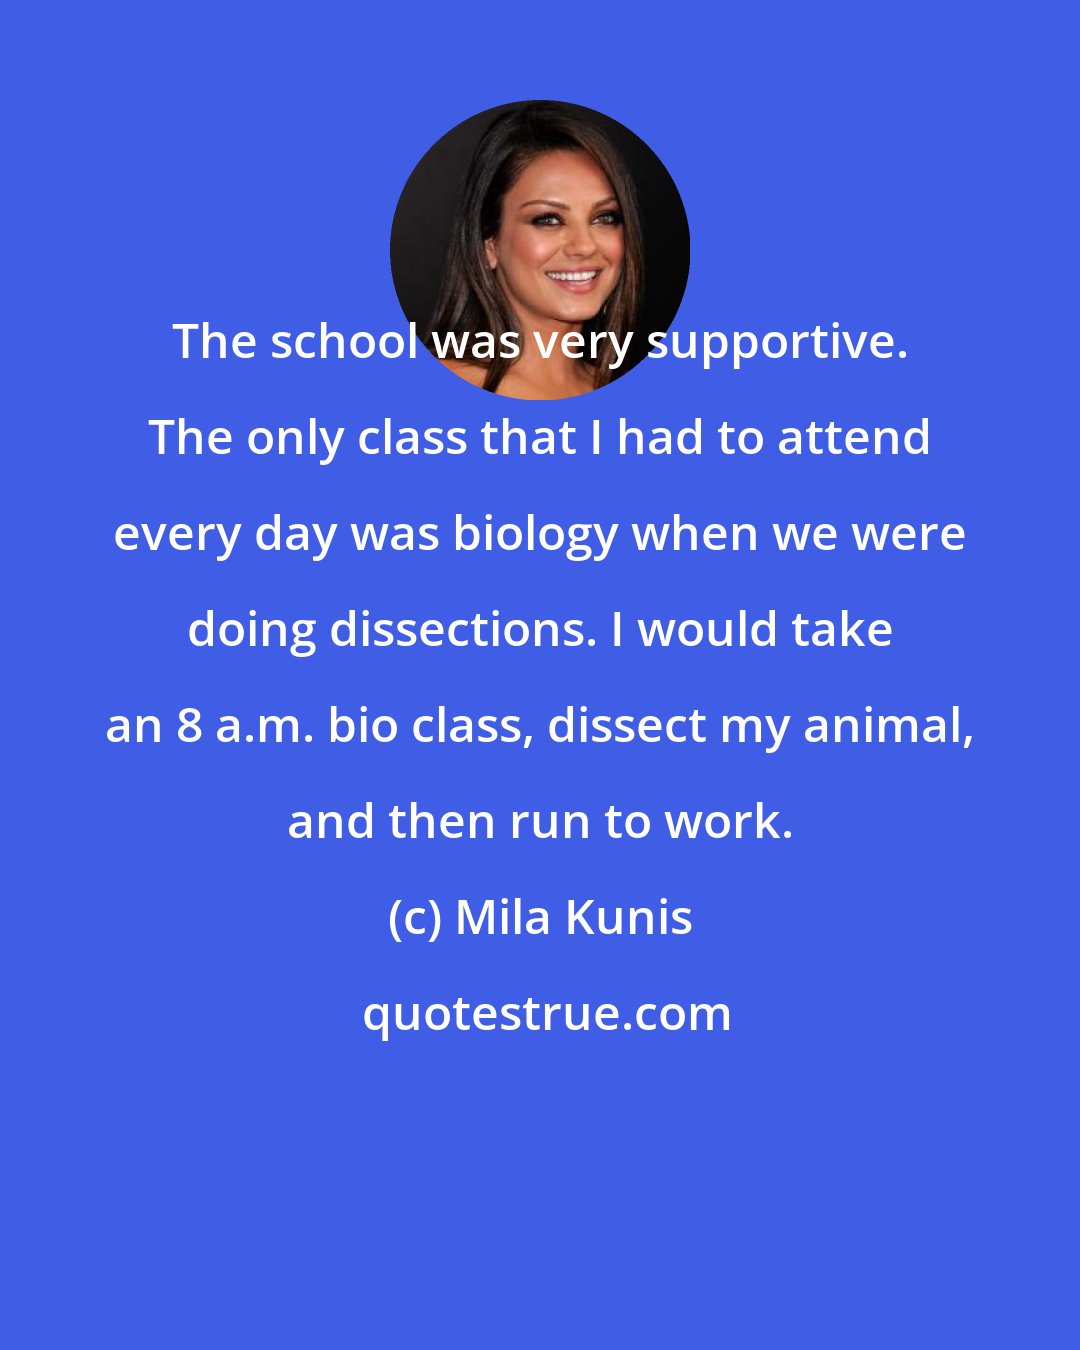 Mila Kunis: The school was very supportive. The only class that I had to attend every day was biology when we were doing dissections. I would take an 8 a.m. bio class, dissect my animal, and then run to work.